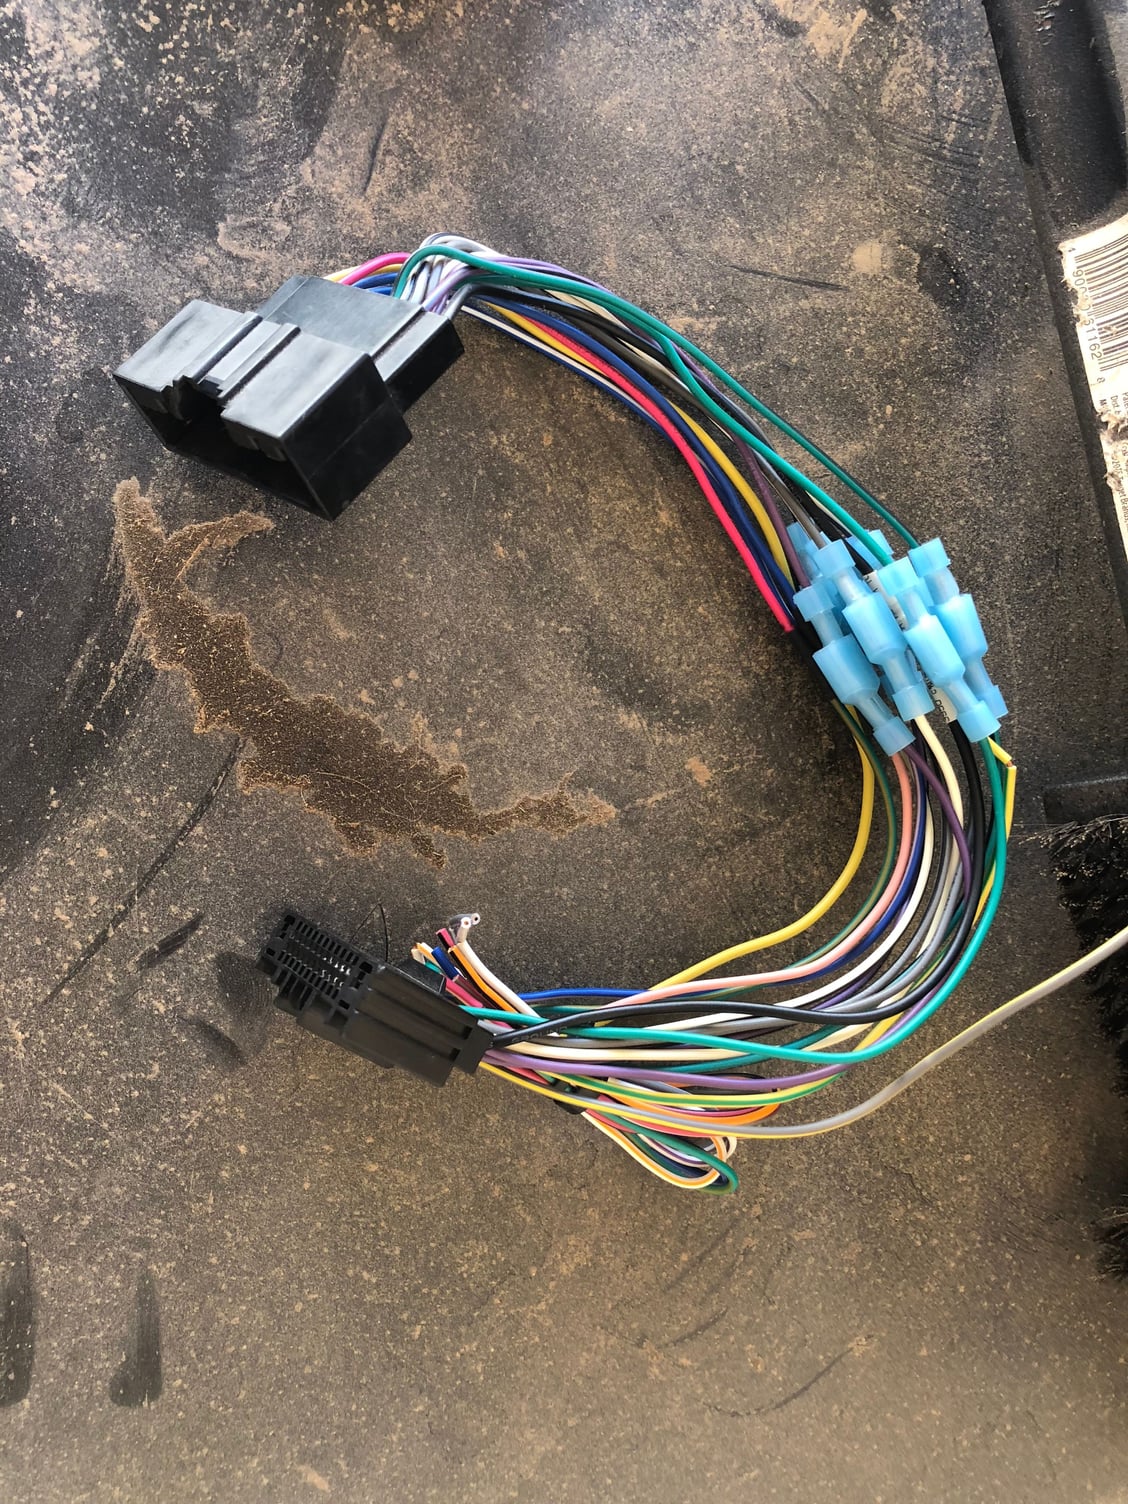 Stereo upgrade,, wiring harness - Ford Truck Enthusiasts Forums